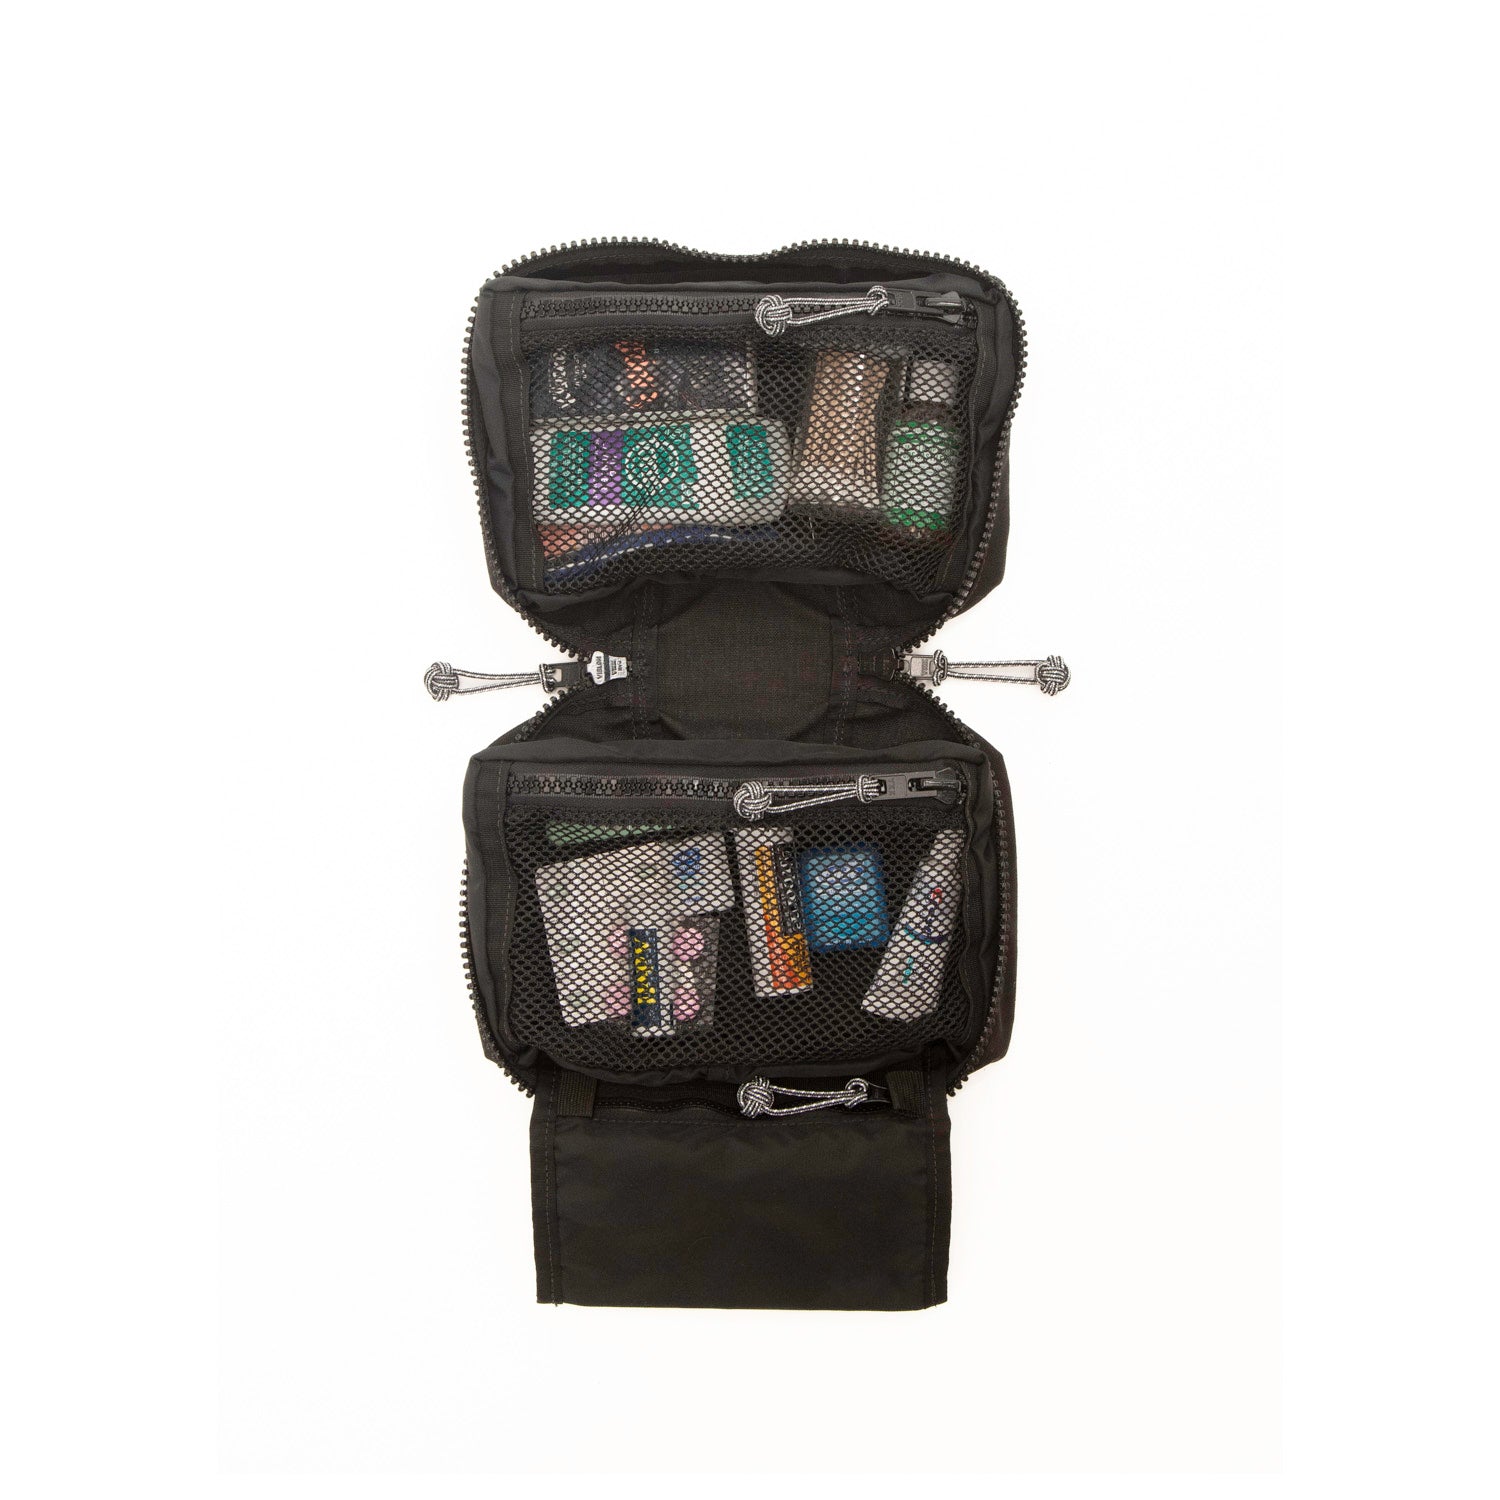 Interior view of Tri Fold Shave Kit with toiletries.  